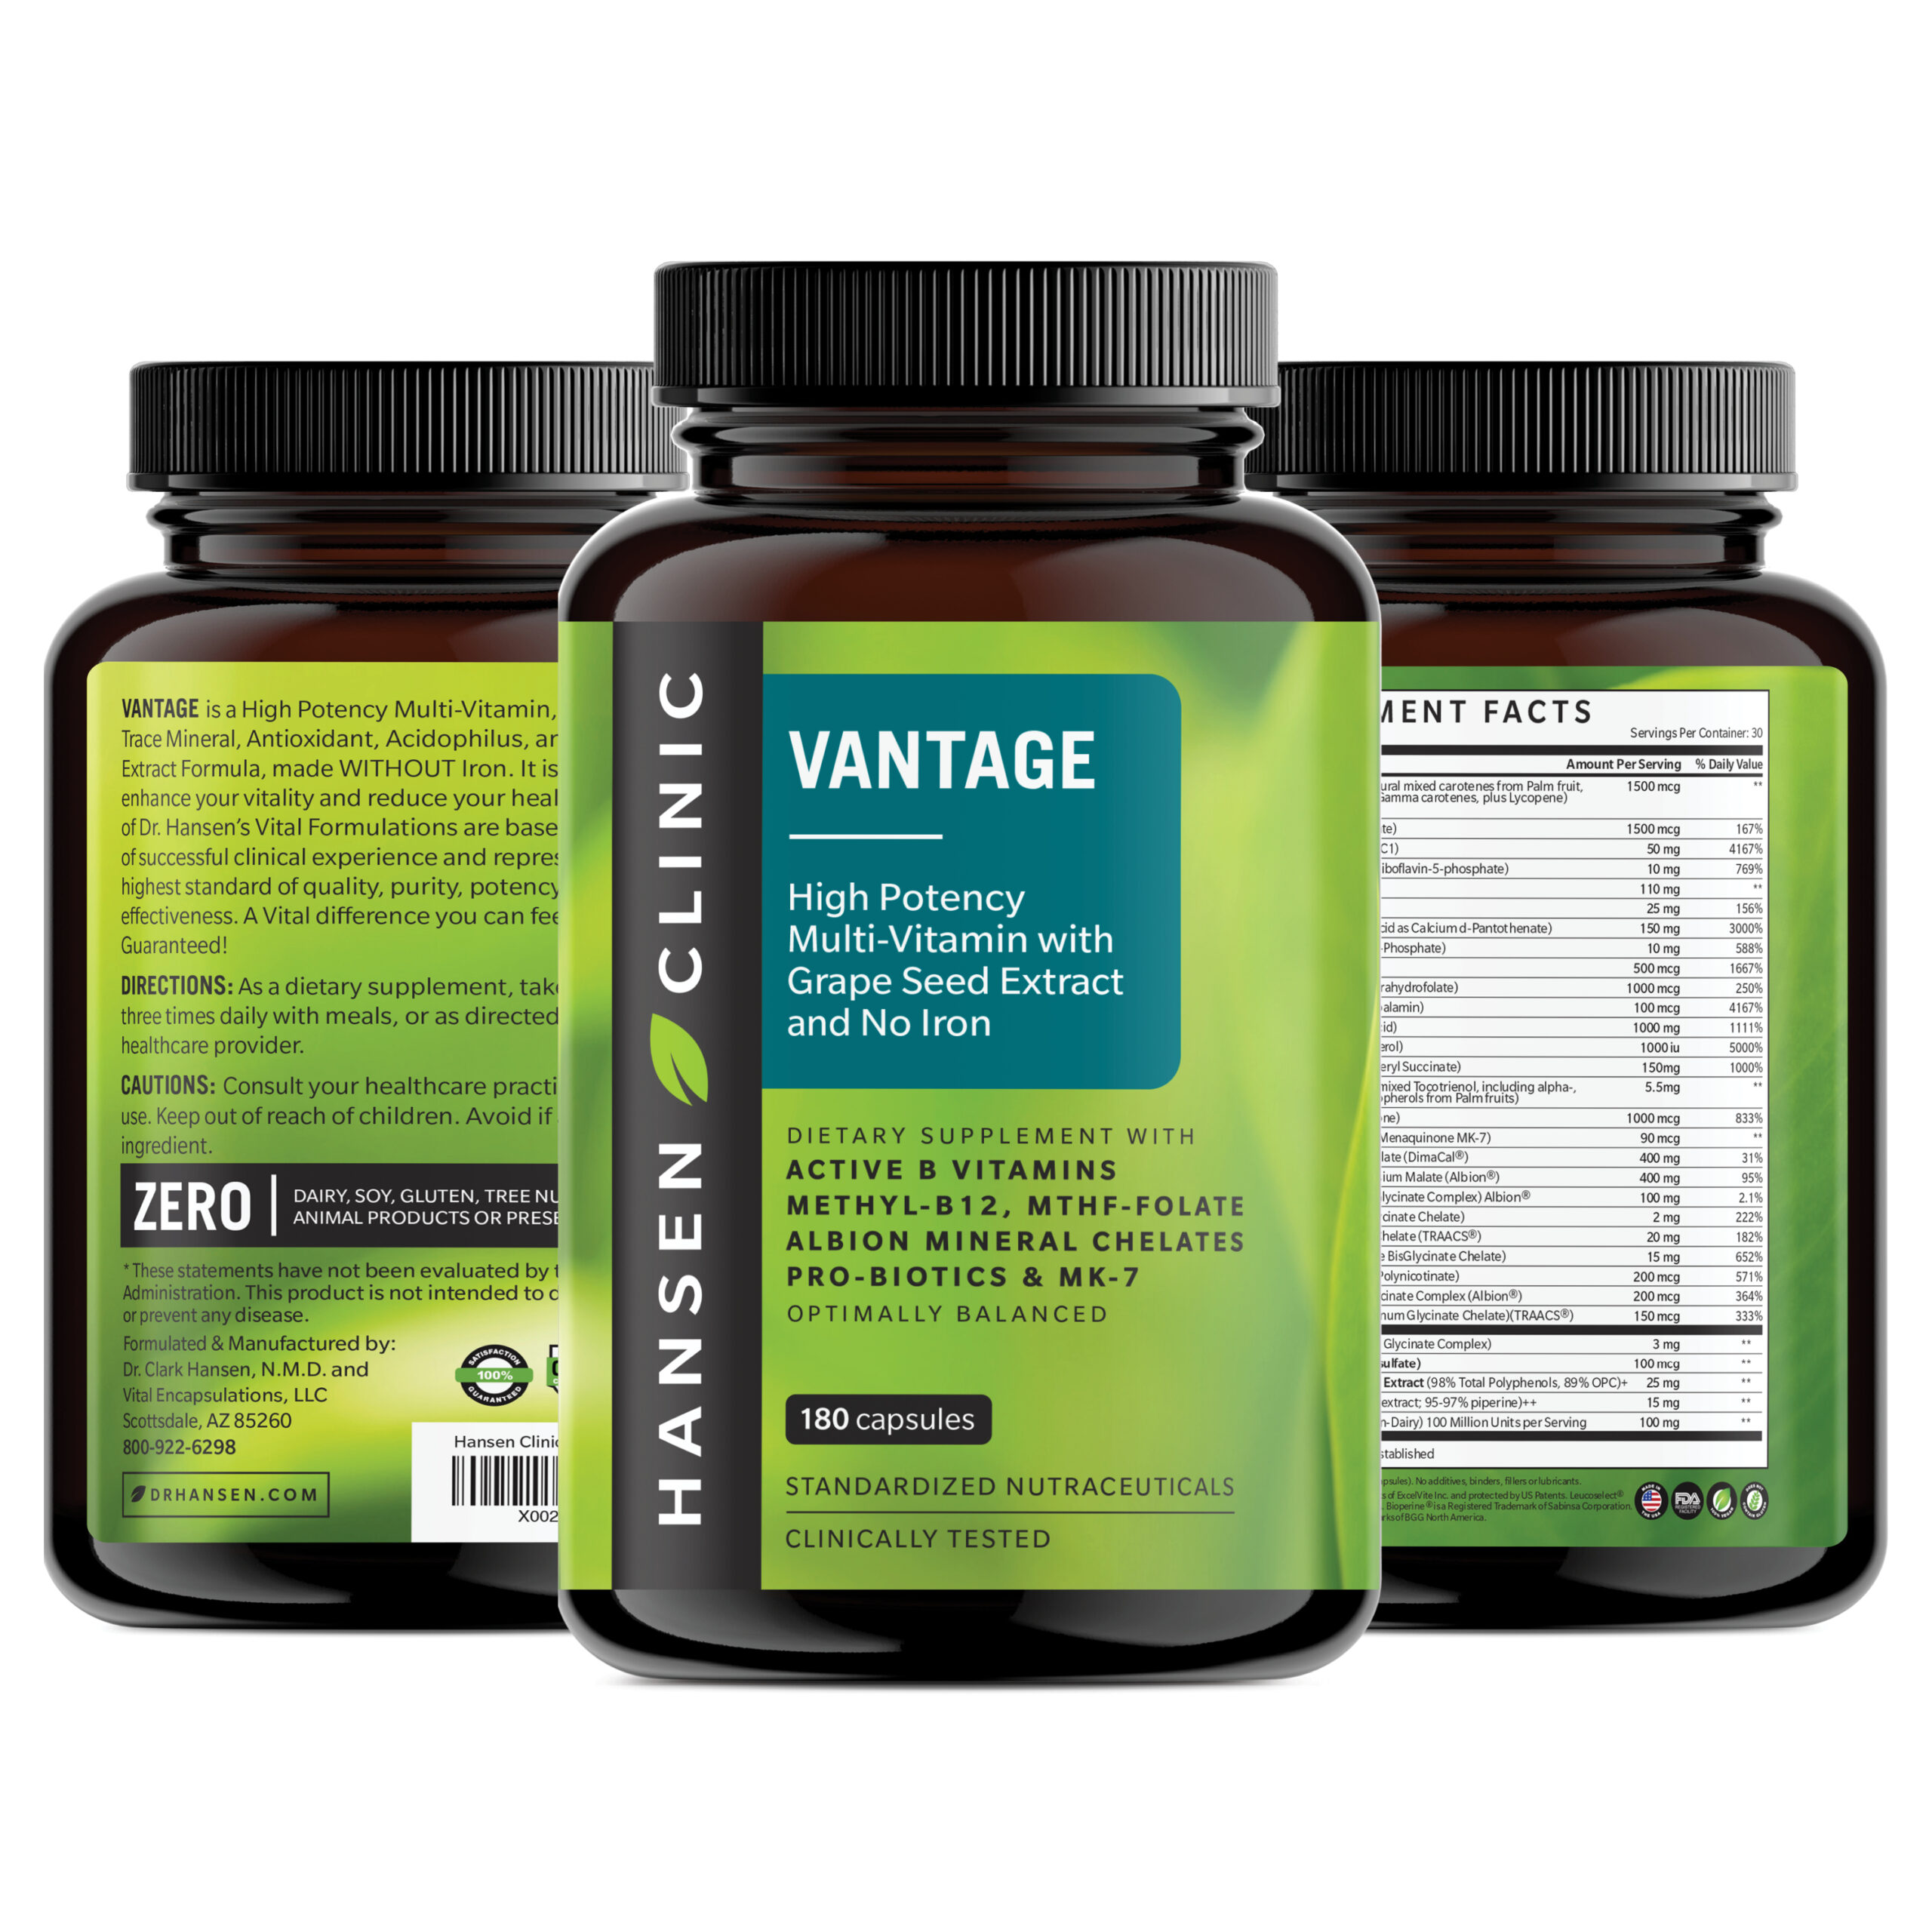 Test and review supplements like Vantage Multi-vitamin developed by Dr Hansen